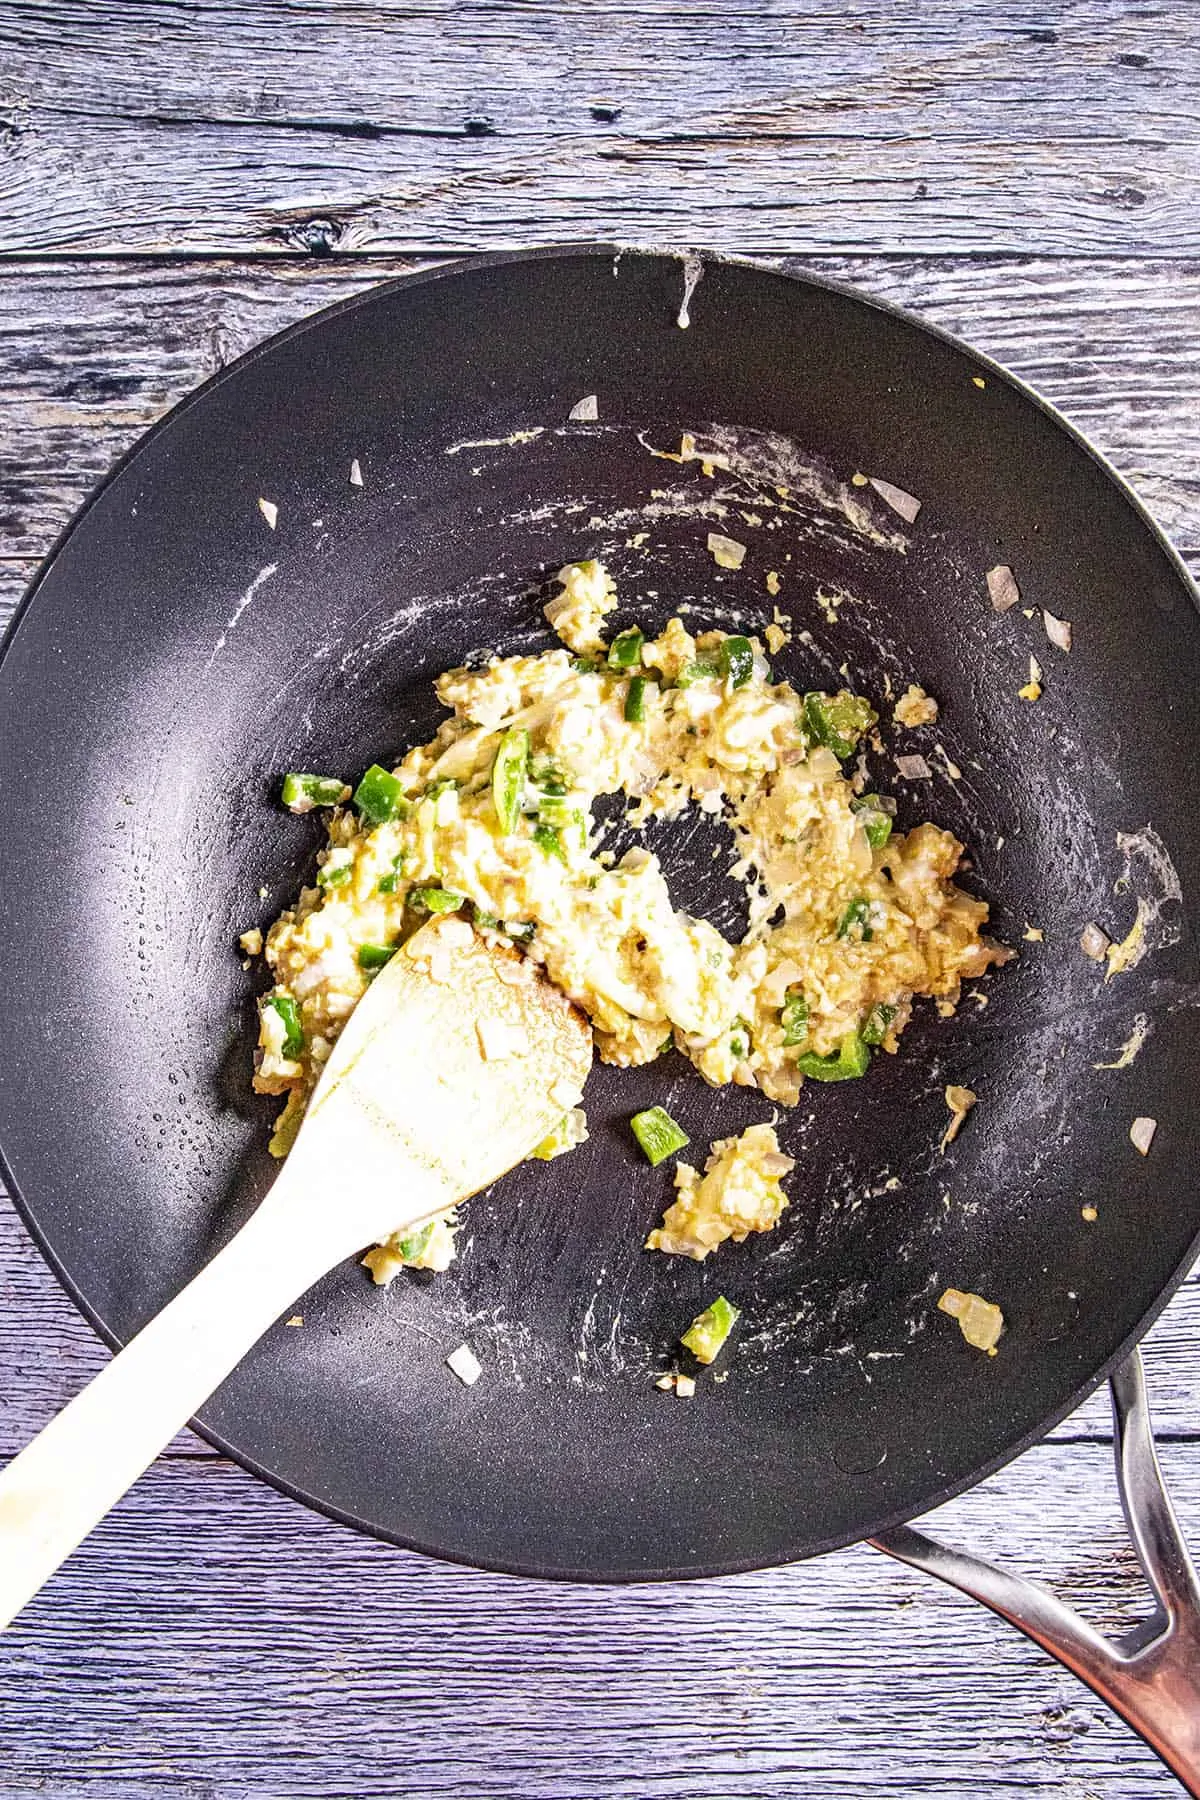 Scrambling eggs in a hot pan for making fried rice